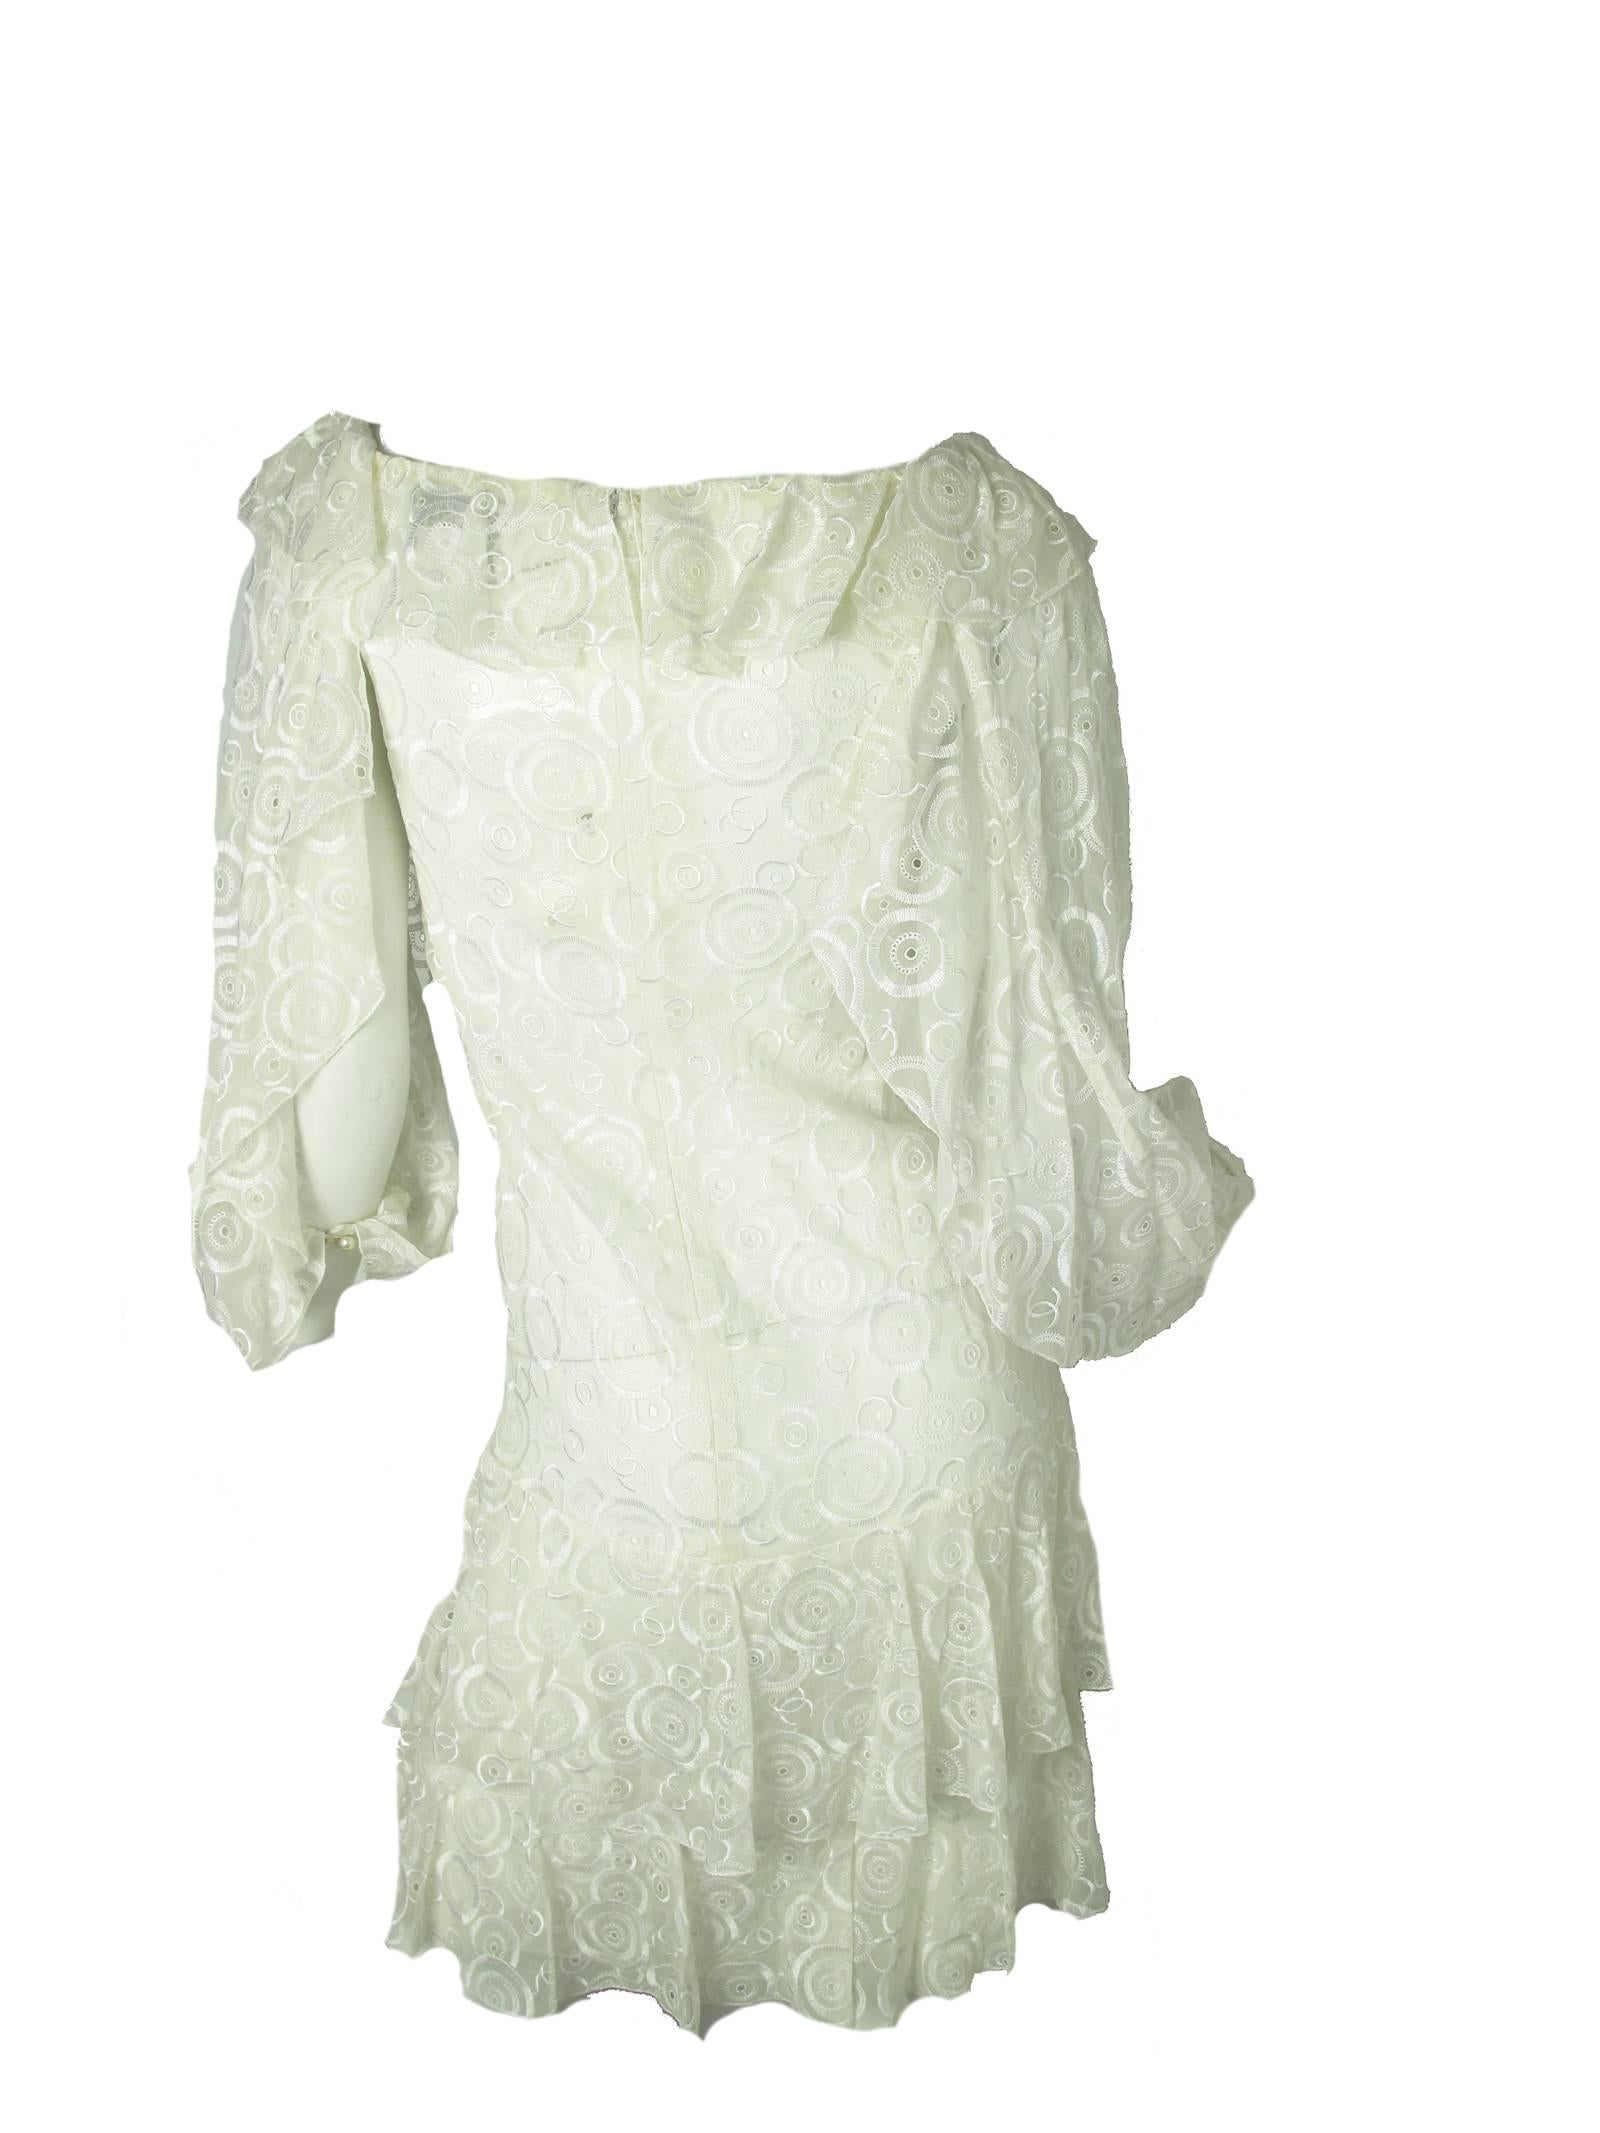 Gray 2001 Chanel White Lace Dress with 